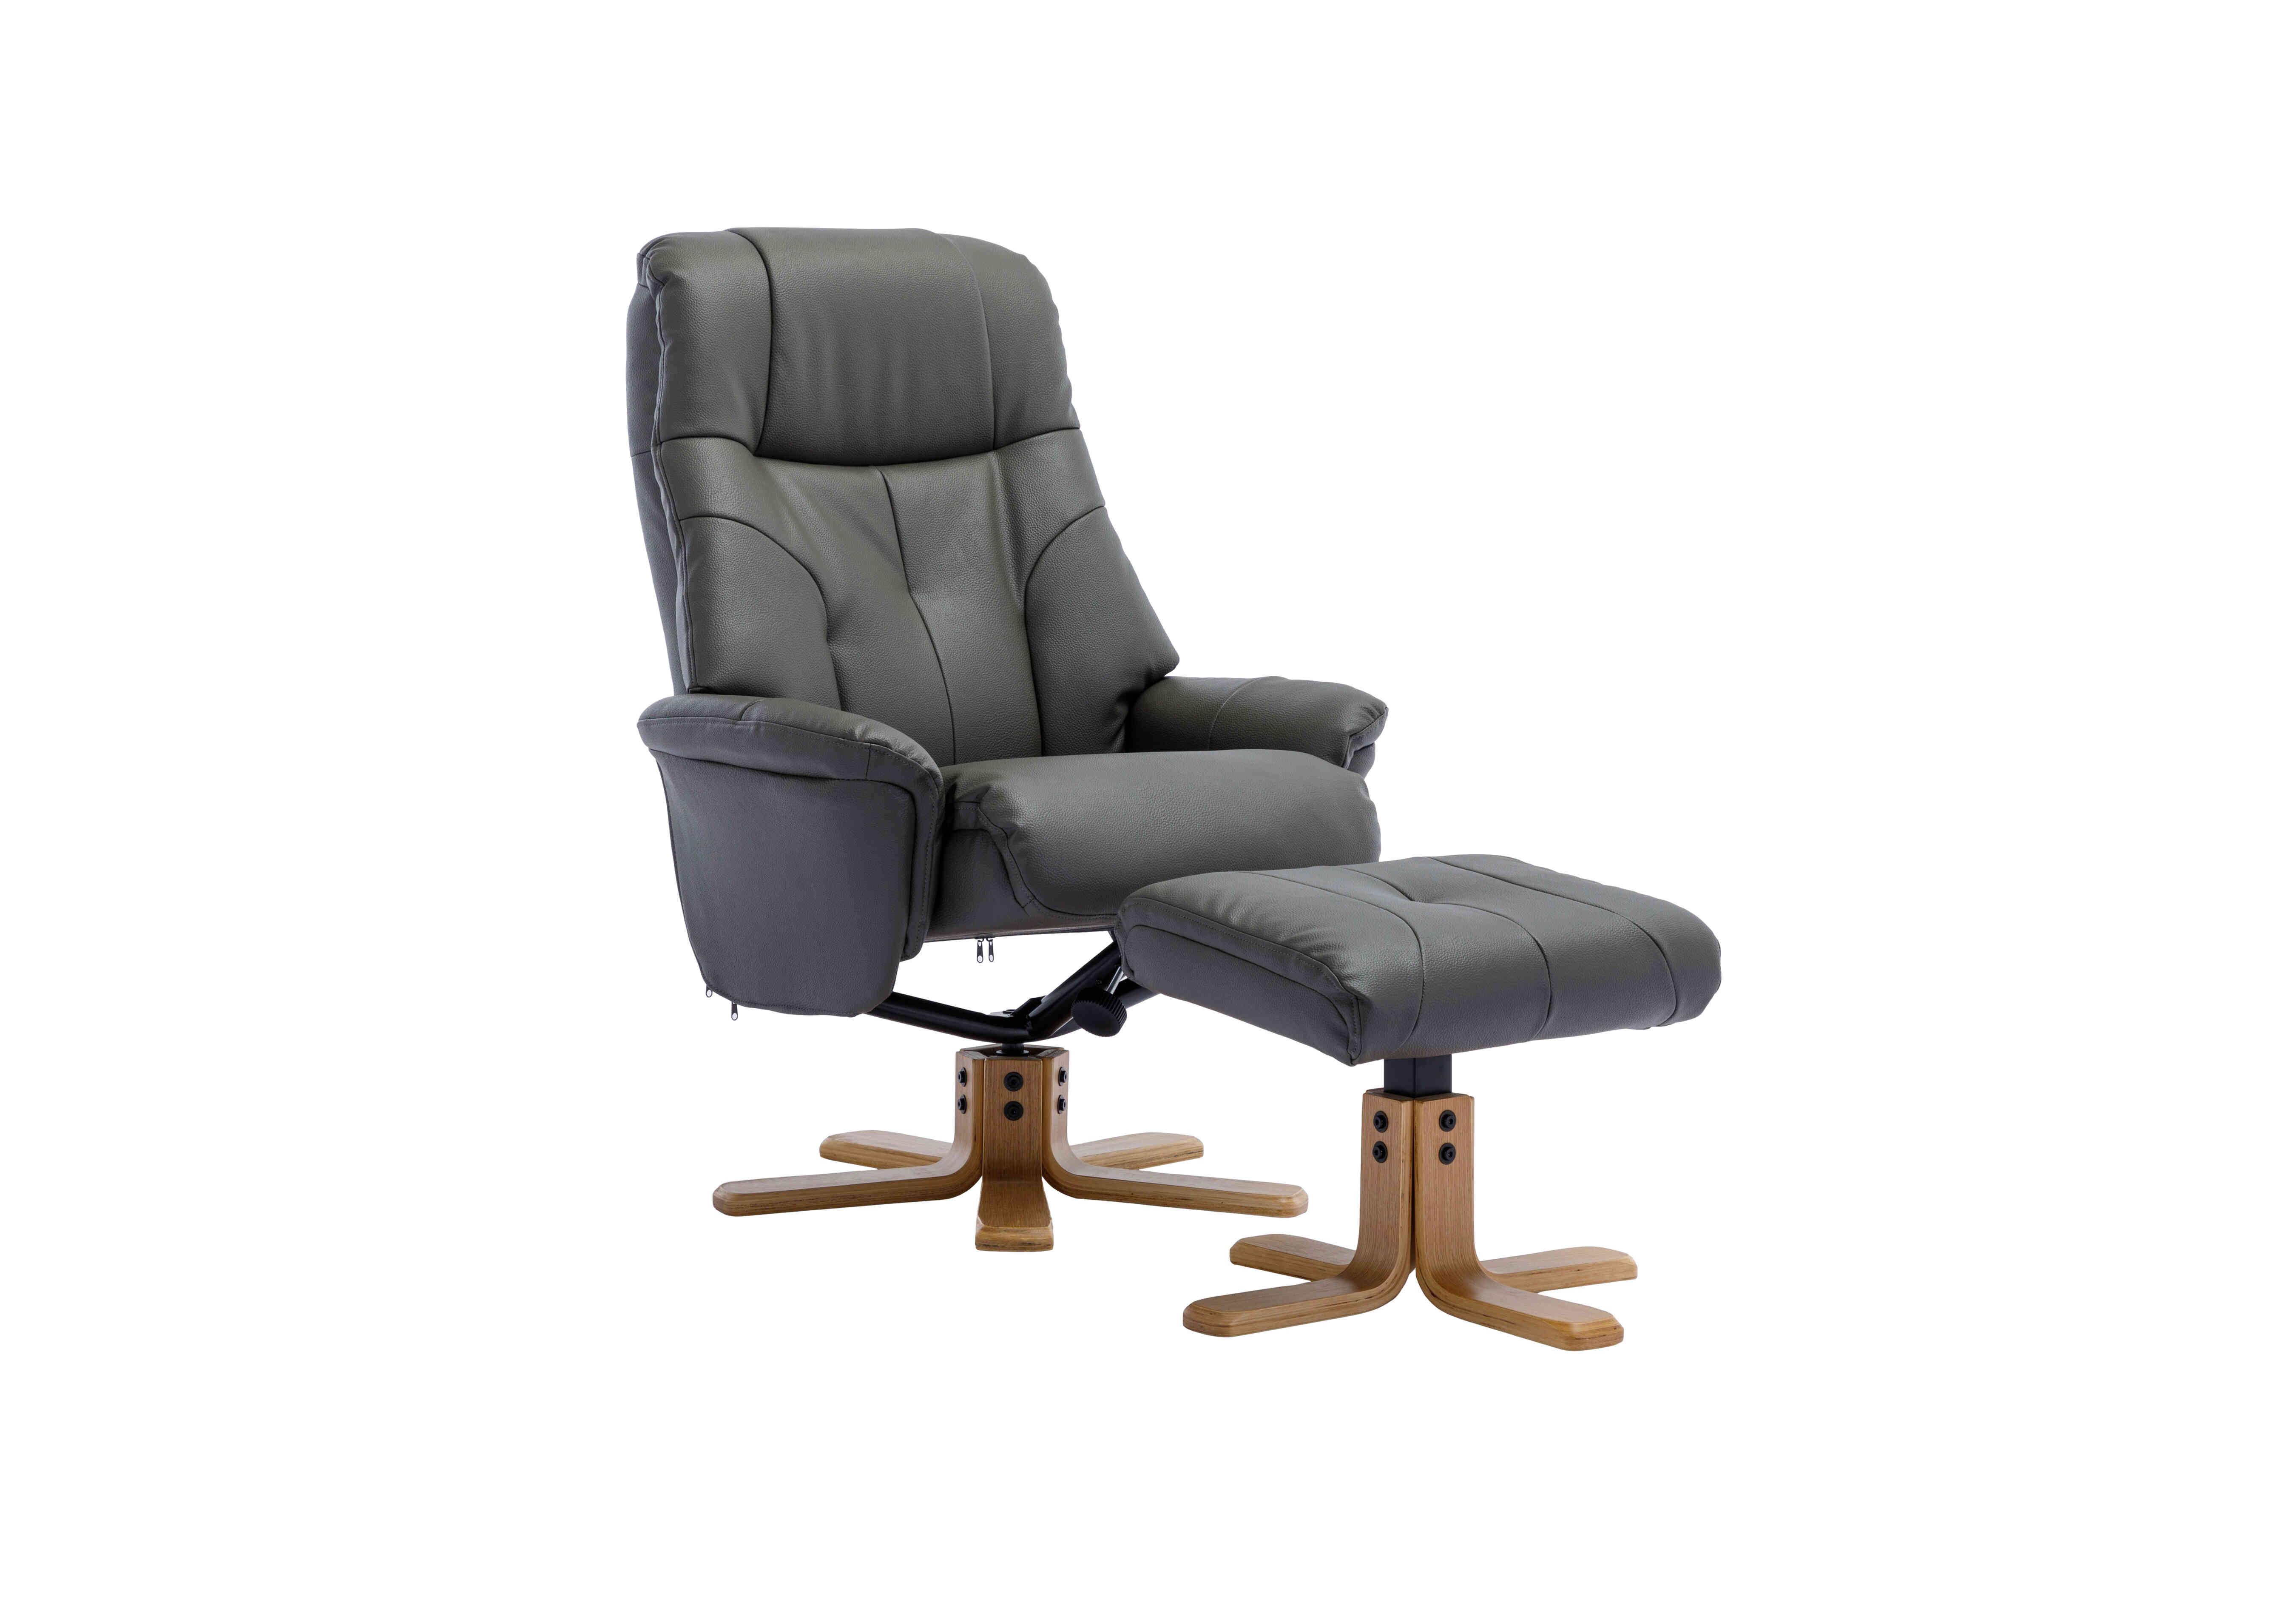 Muscat Faux Leather Swivel Recliner Chair and Footstool in Cinder Plush on Furniture Village